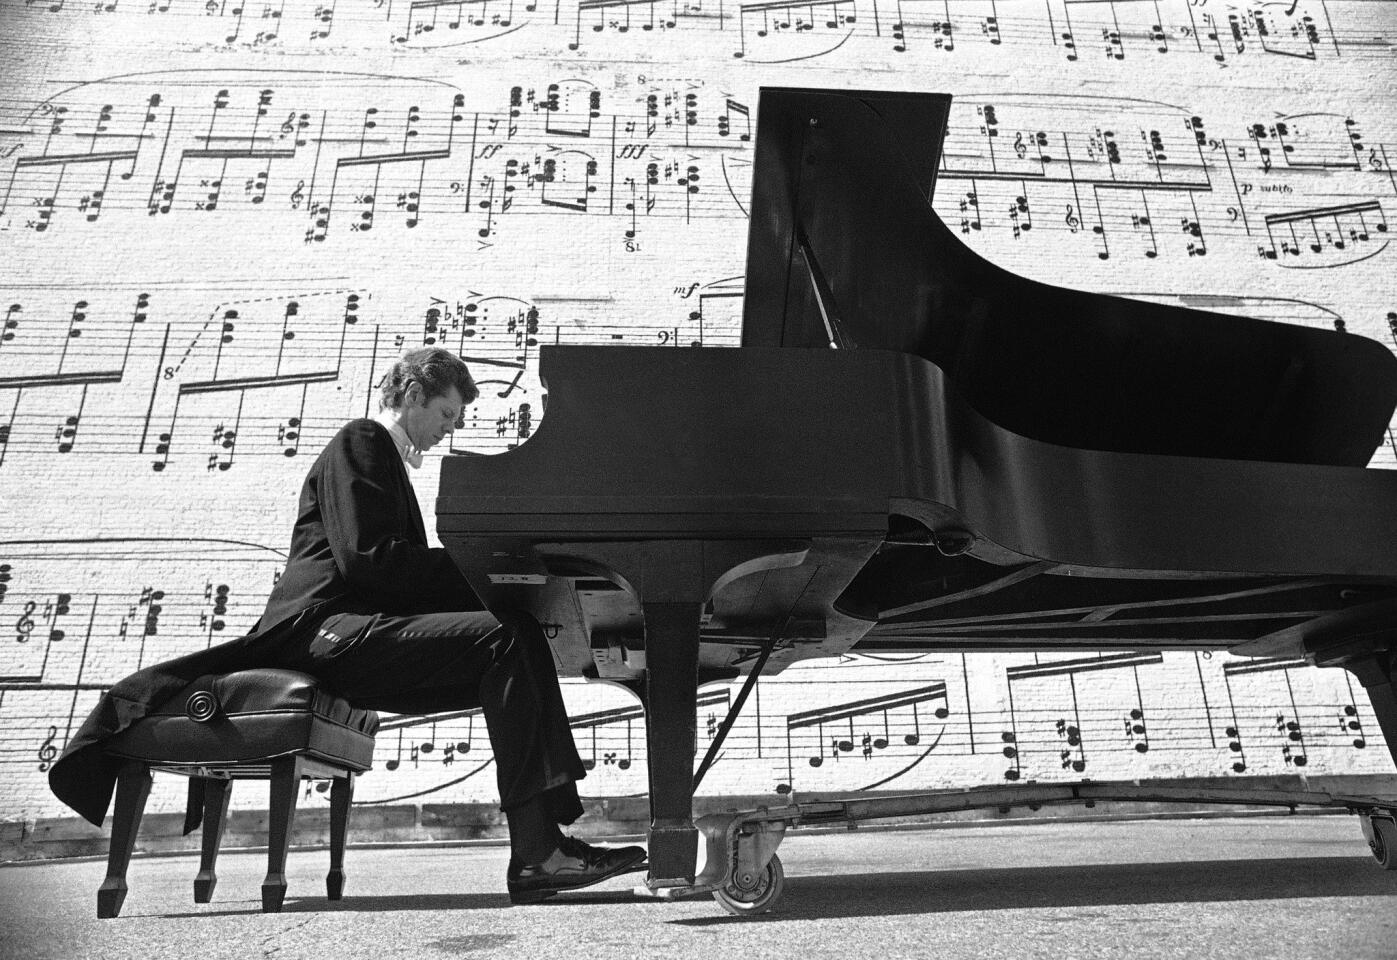 Van Cliburn plays in Minneapolis in 1977. He kept up a frenetic schedule of more than 100 concerts a year for two decades, until retiring from the performance circuit in 1978. In the mid-1990s he embarked on a long-anticipated comeback tour that drew poor reviews.